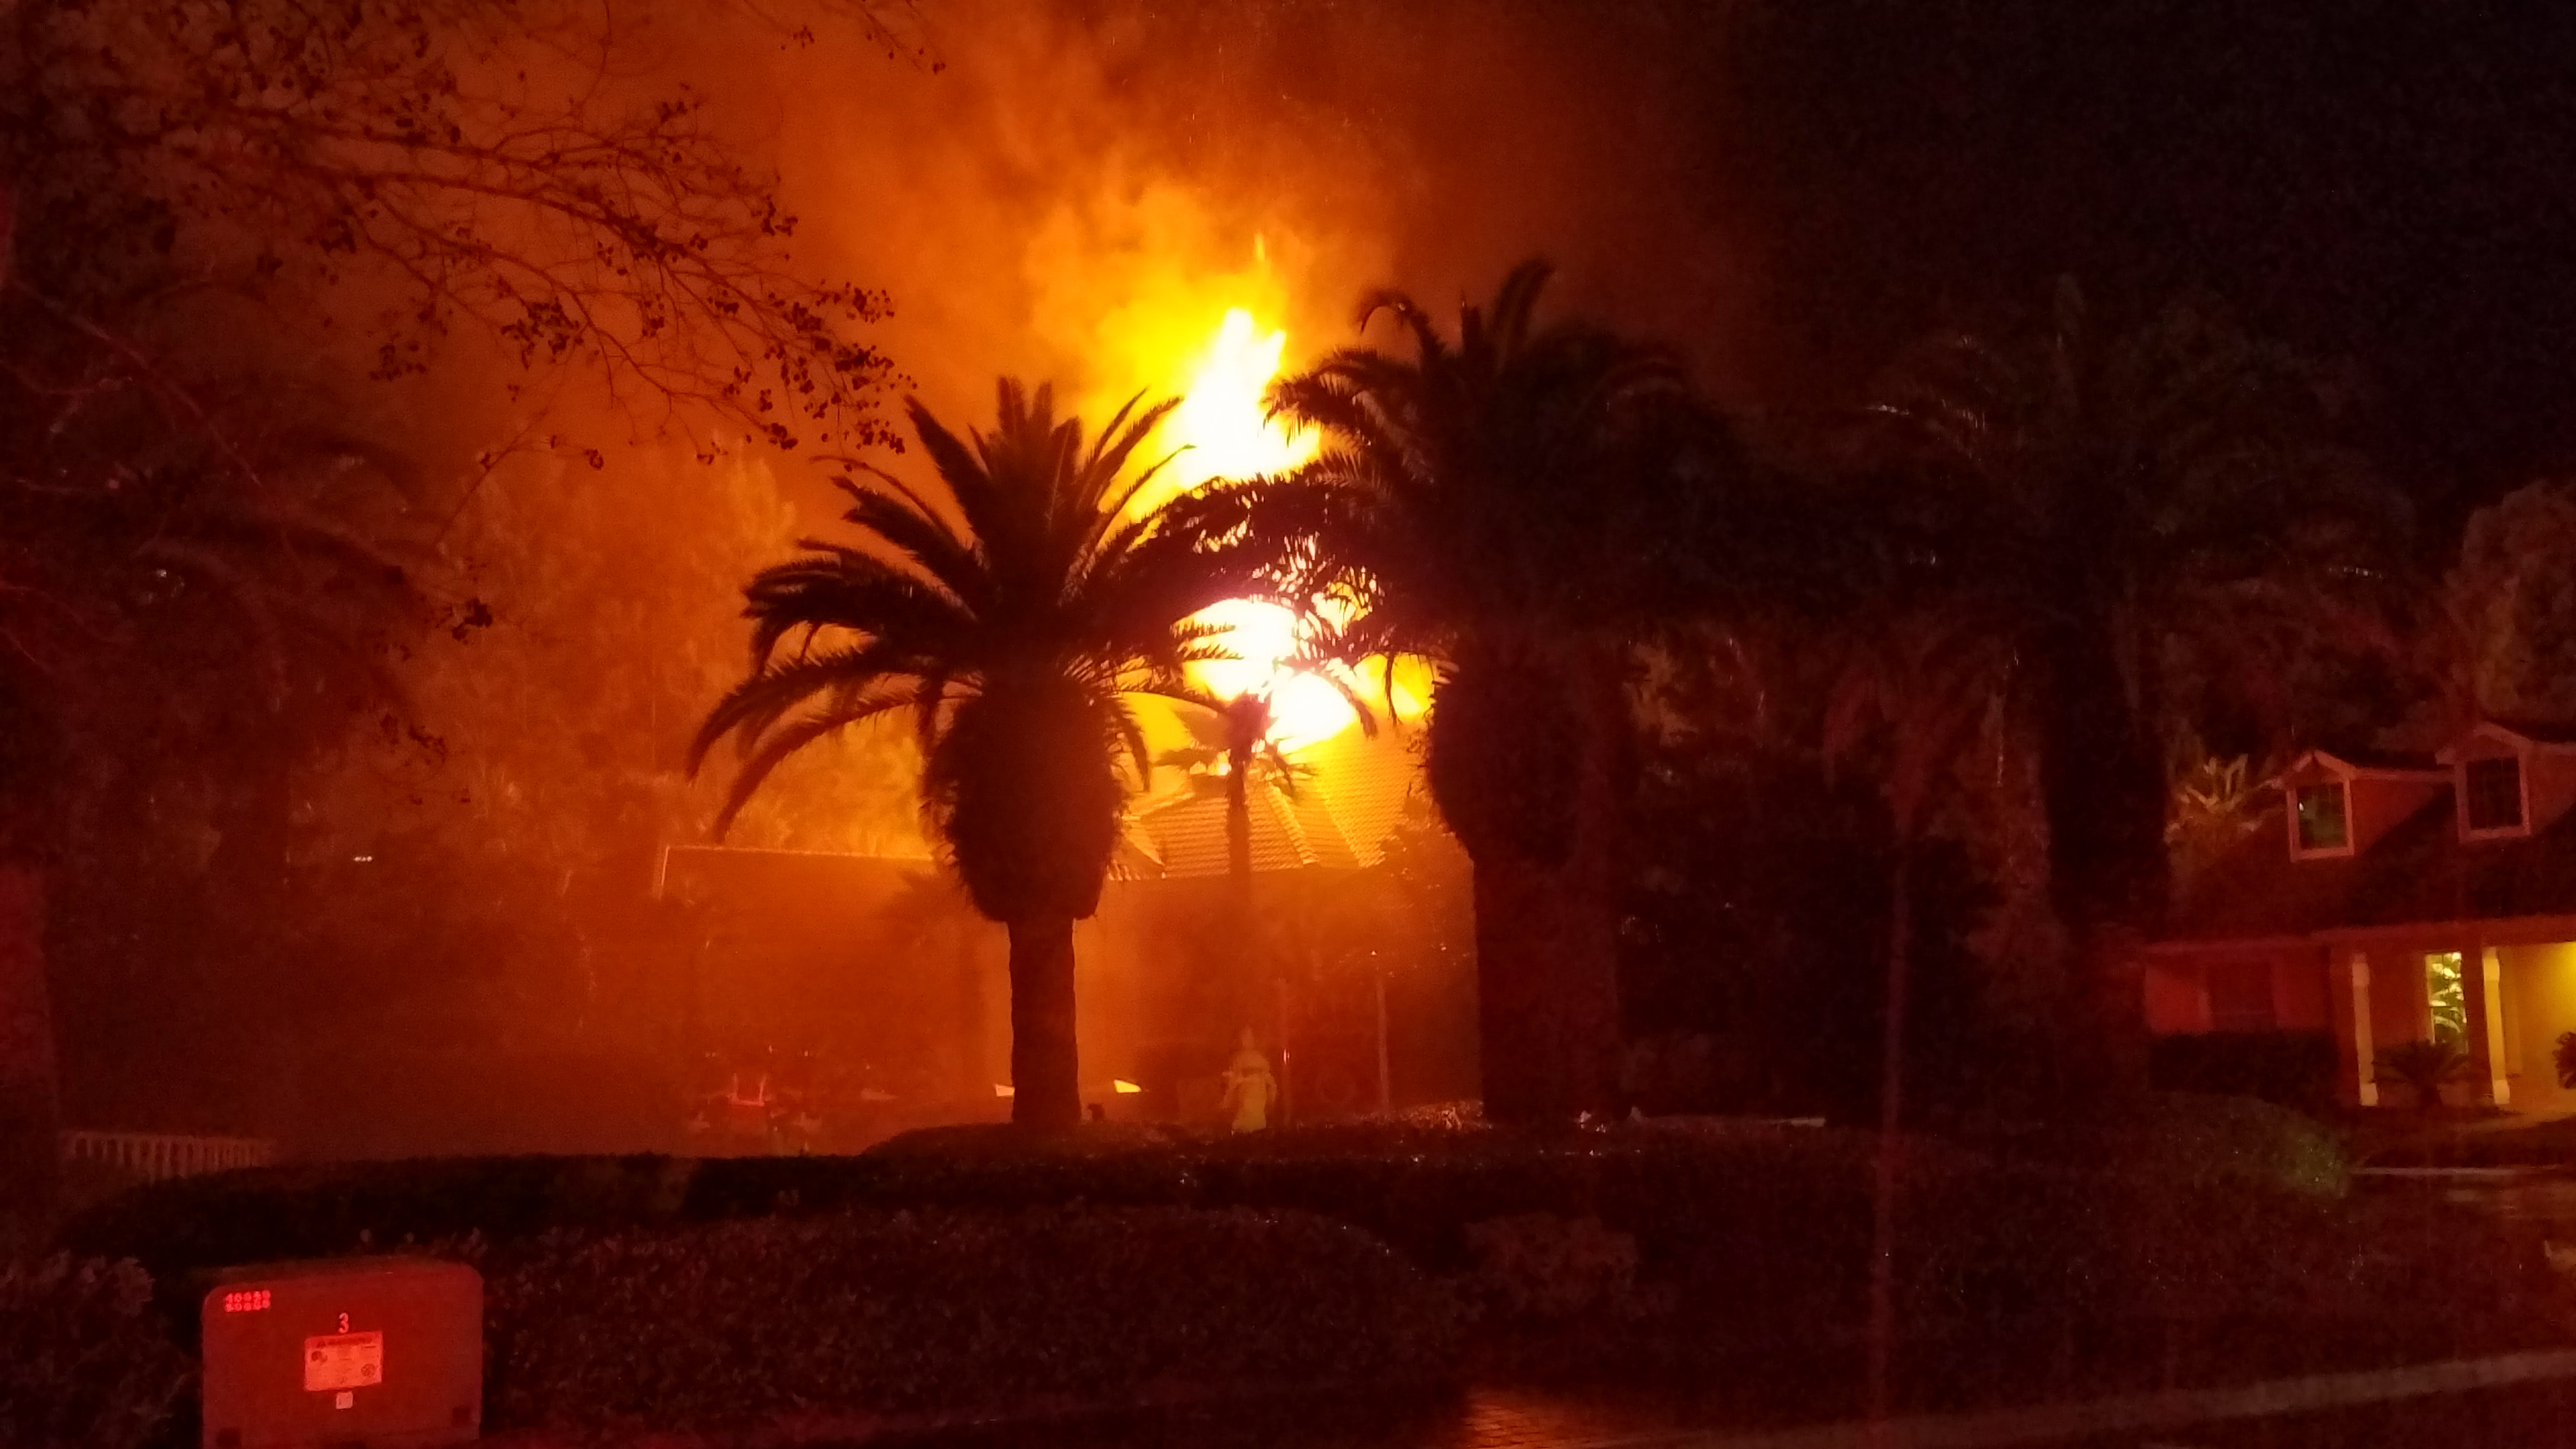 Structure fire at night